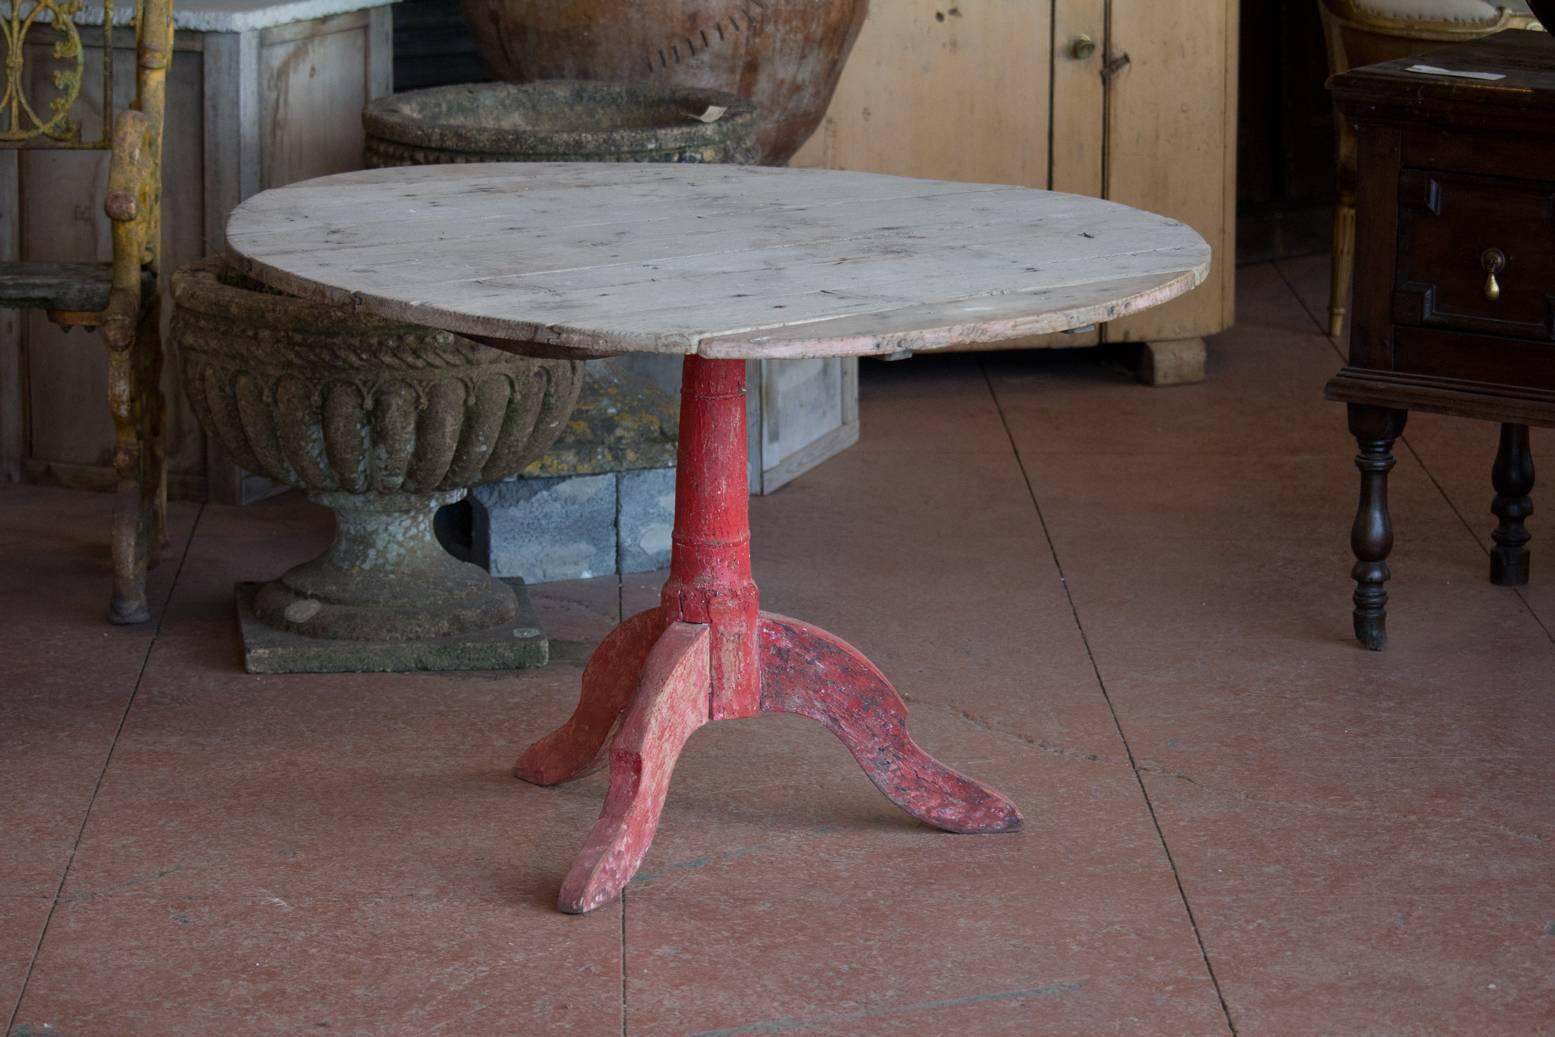 Very unique and rustic antique French farmhouse tripod table with its original red paint. The wood slats can be removed to make a smaller table.